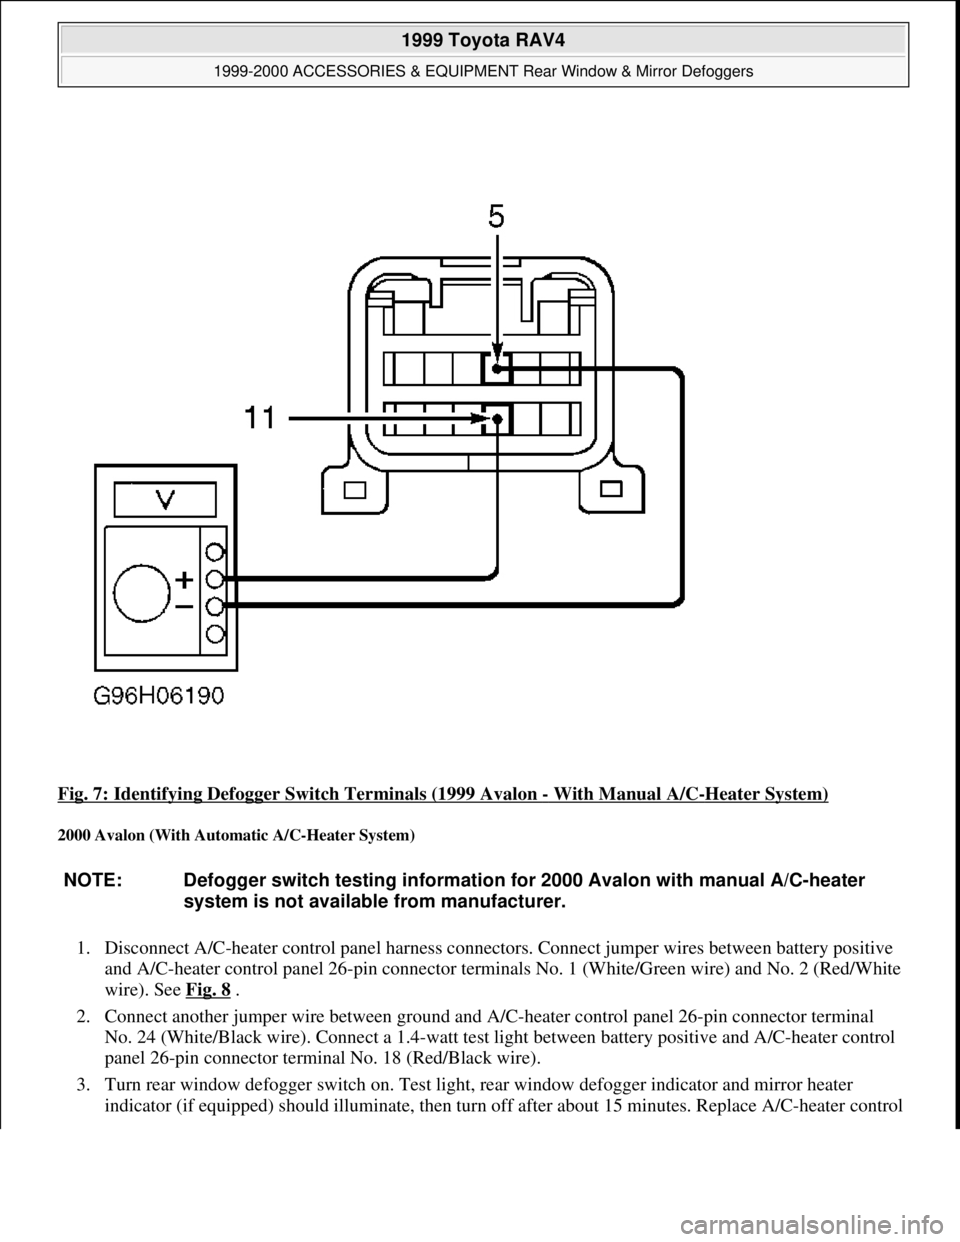 TOYOTA RAV4 1996  Service Repair Manual Fig. 7: Identifying Defogger Switch Terminals (1999 Avalon - With Manual A/C-Heater System) 
2000 Avalon (With Automatic A/C-Heater System) 
1. Disconnect A/C-heater control panel harness connectors. 